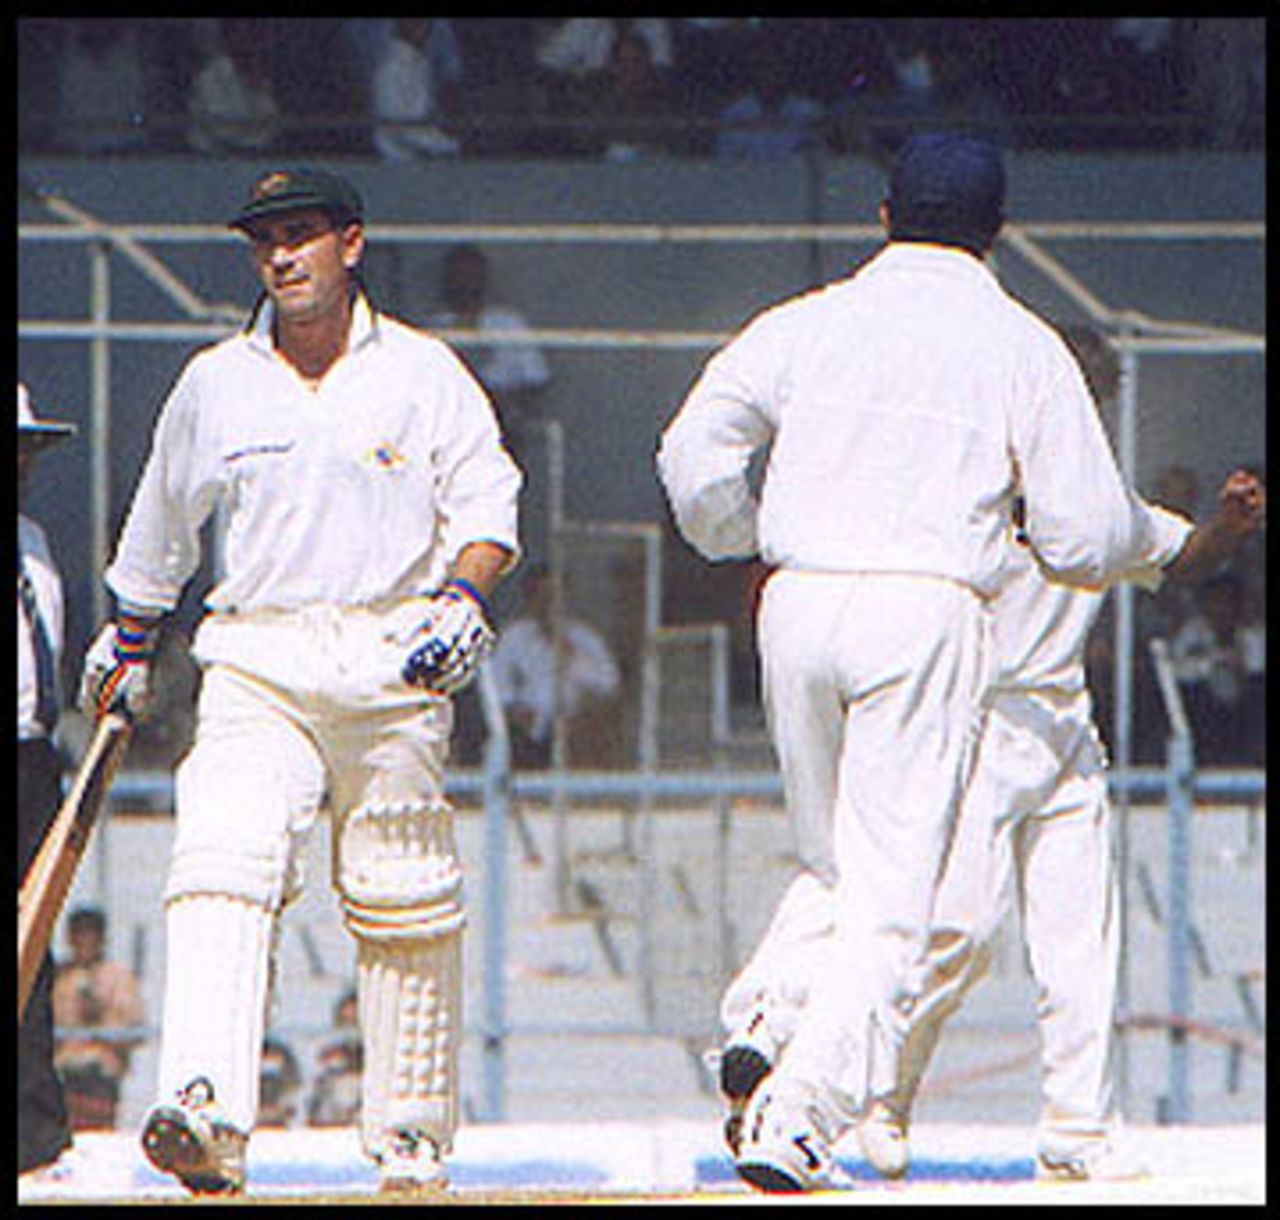 A dejected Langer departs after being caught by Mane off Bahutule. Australia in India 2000/01, Mumbai v Australians, Brabourne Stadium, Mumbai, 22-24 Feb 2001 (Day 3).